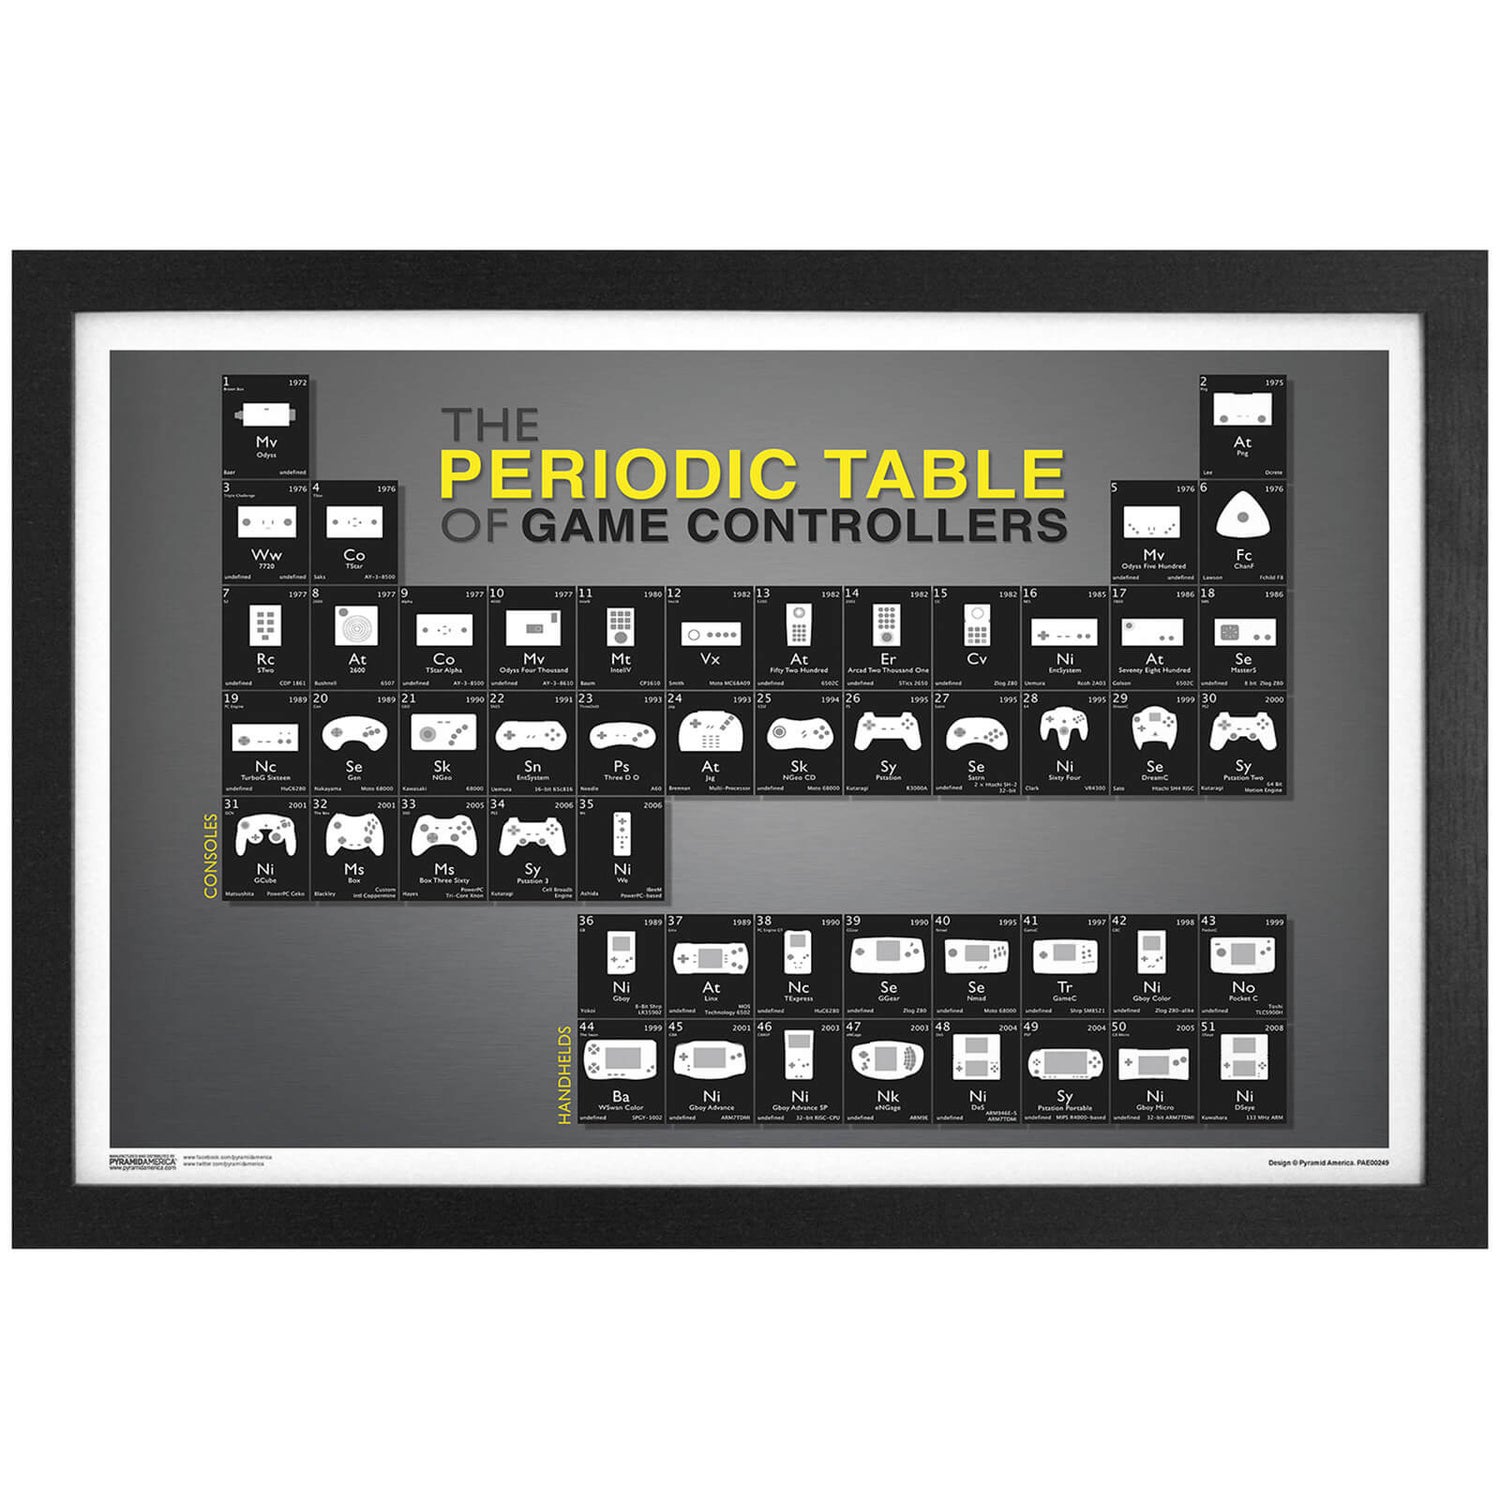 The Periodic Table of Game Controllers Framed Art Print